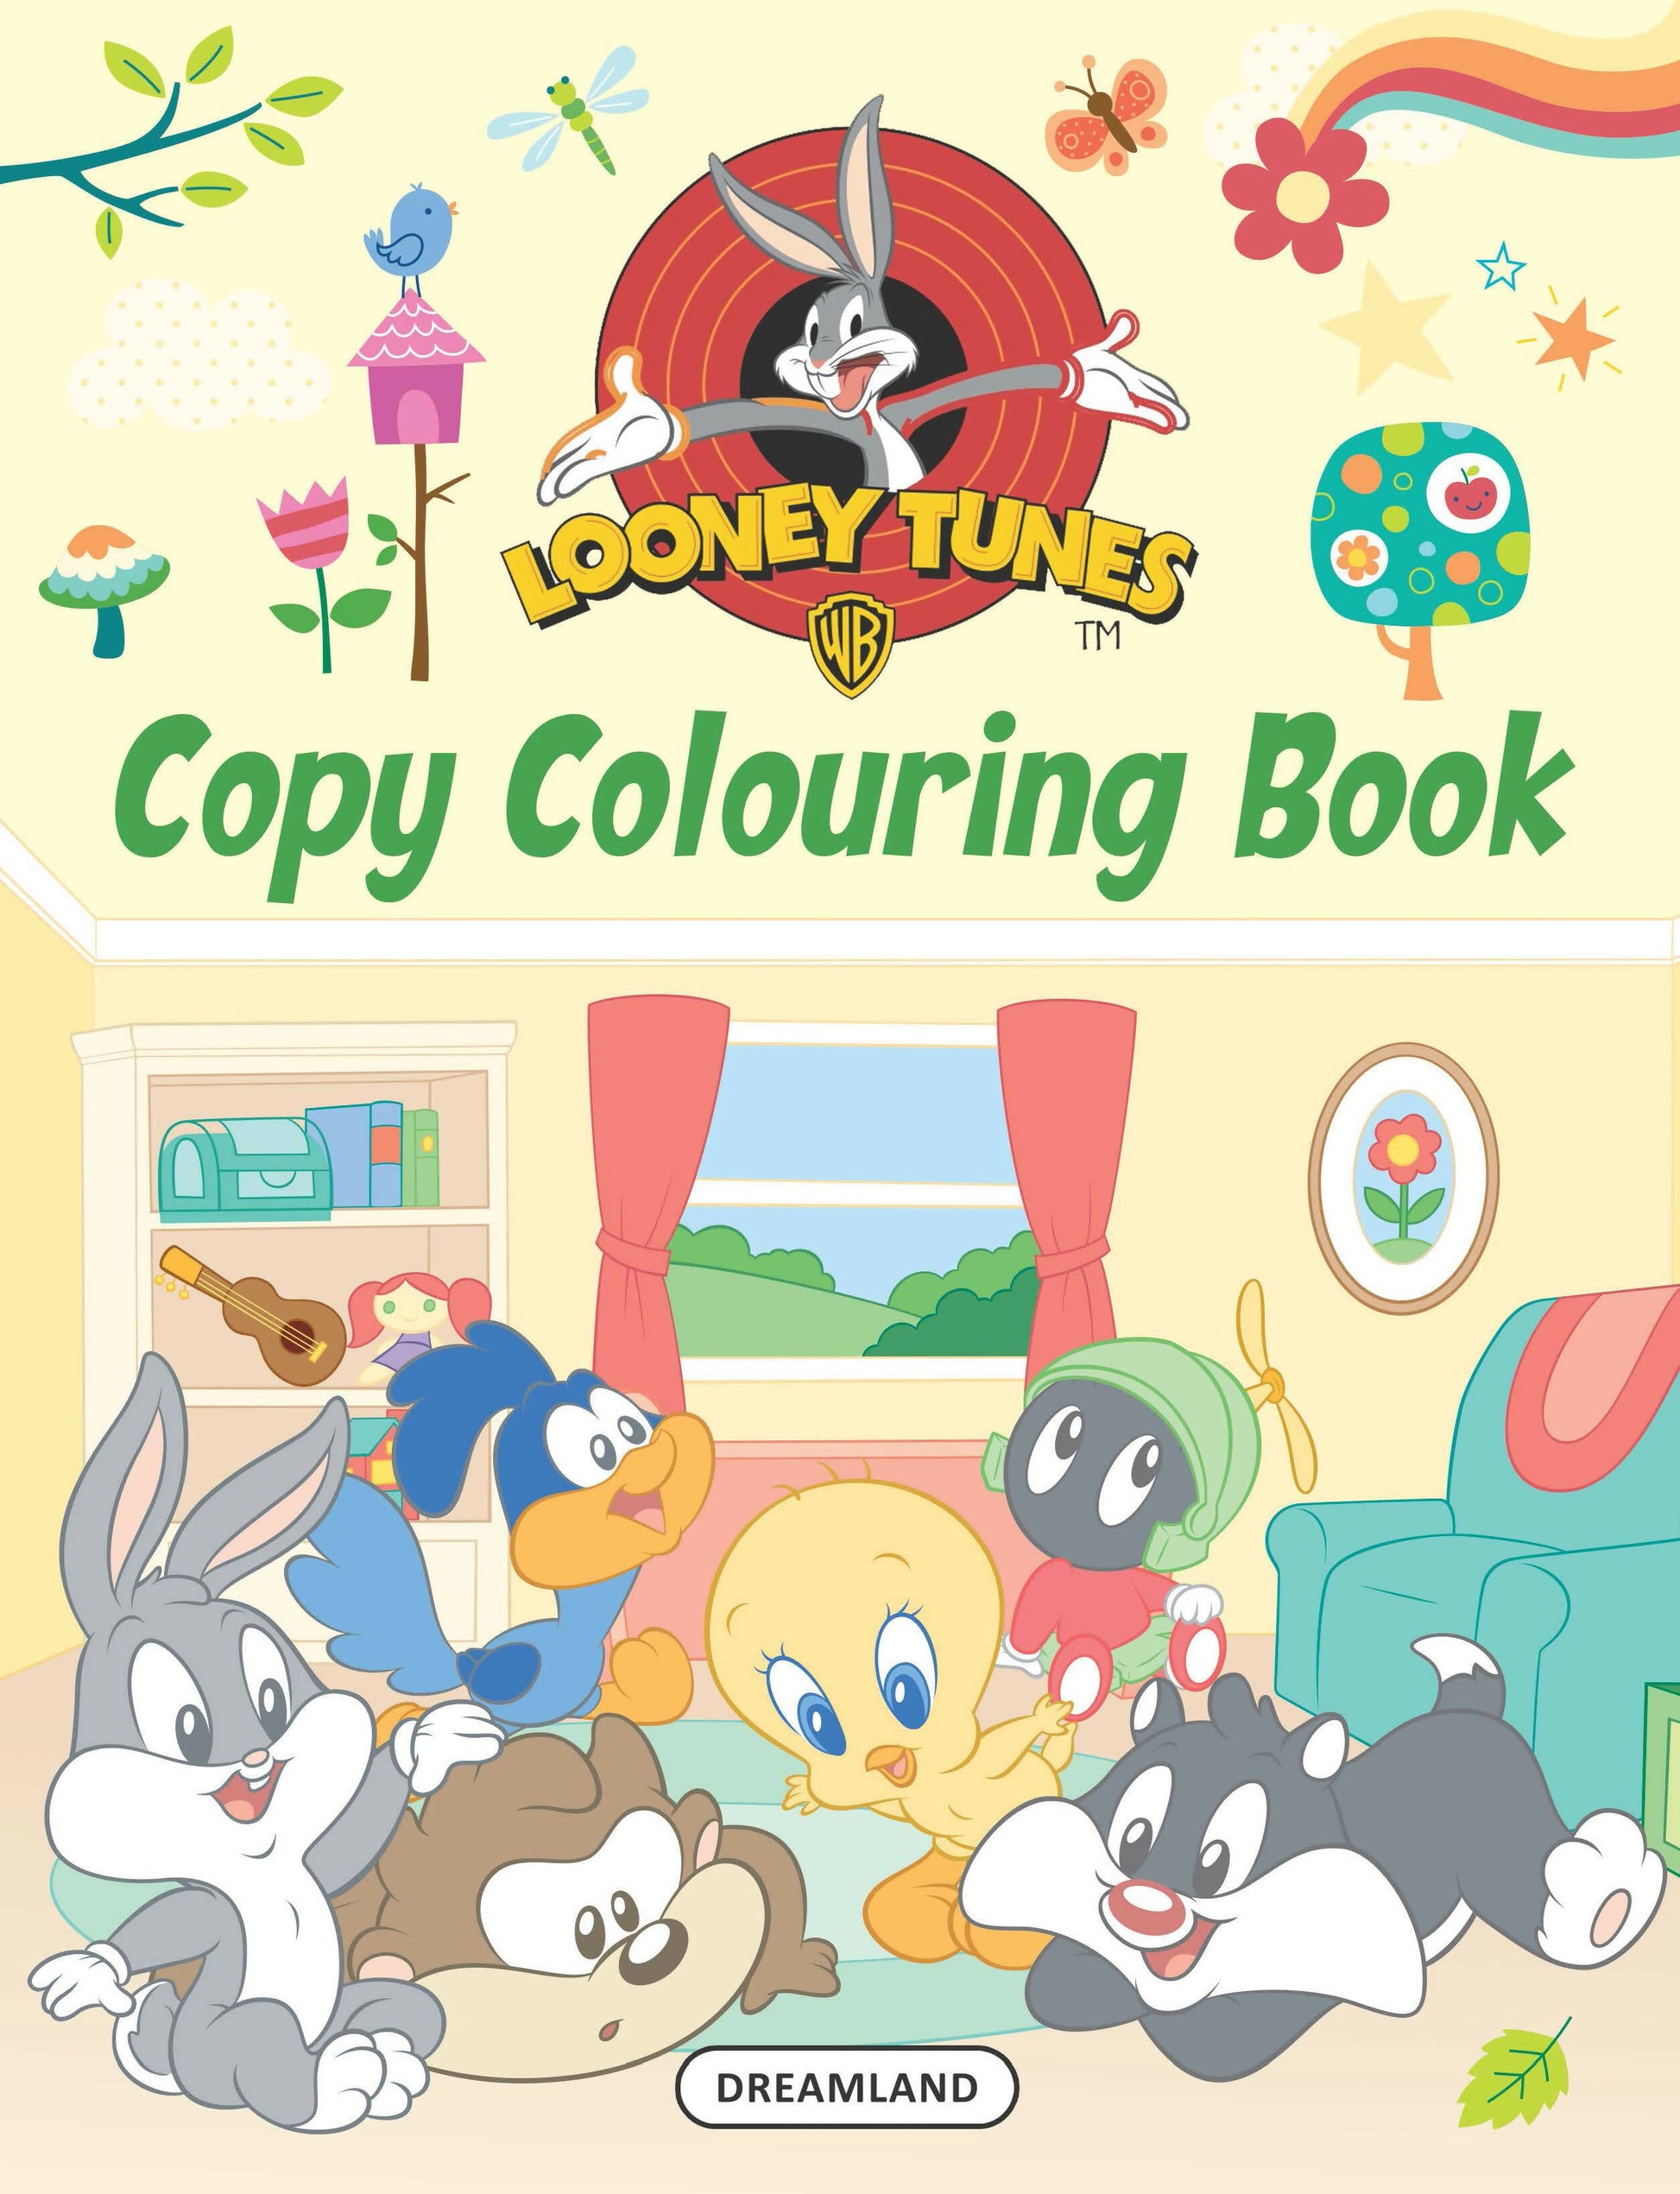 Dreamland Looney Tunes Copy Colouring Book : Children Drawing, Painting & Colouring Book -  buy in usa 